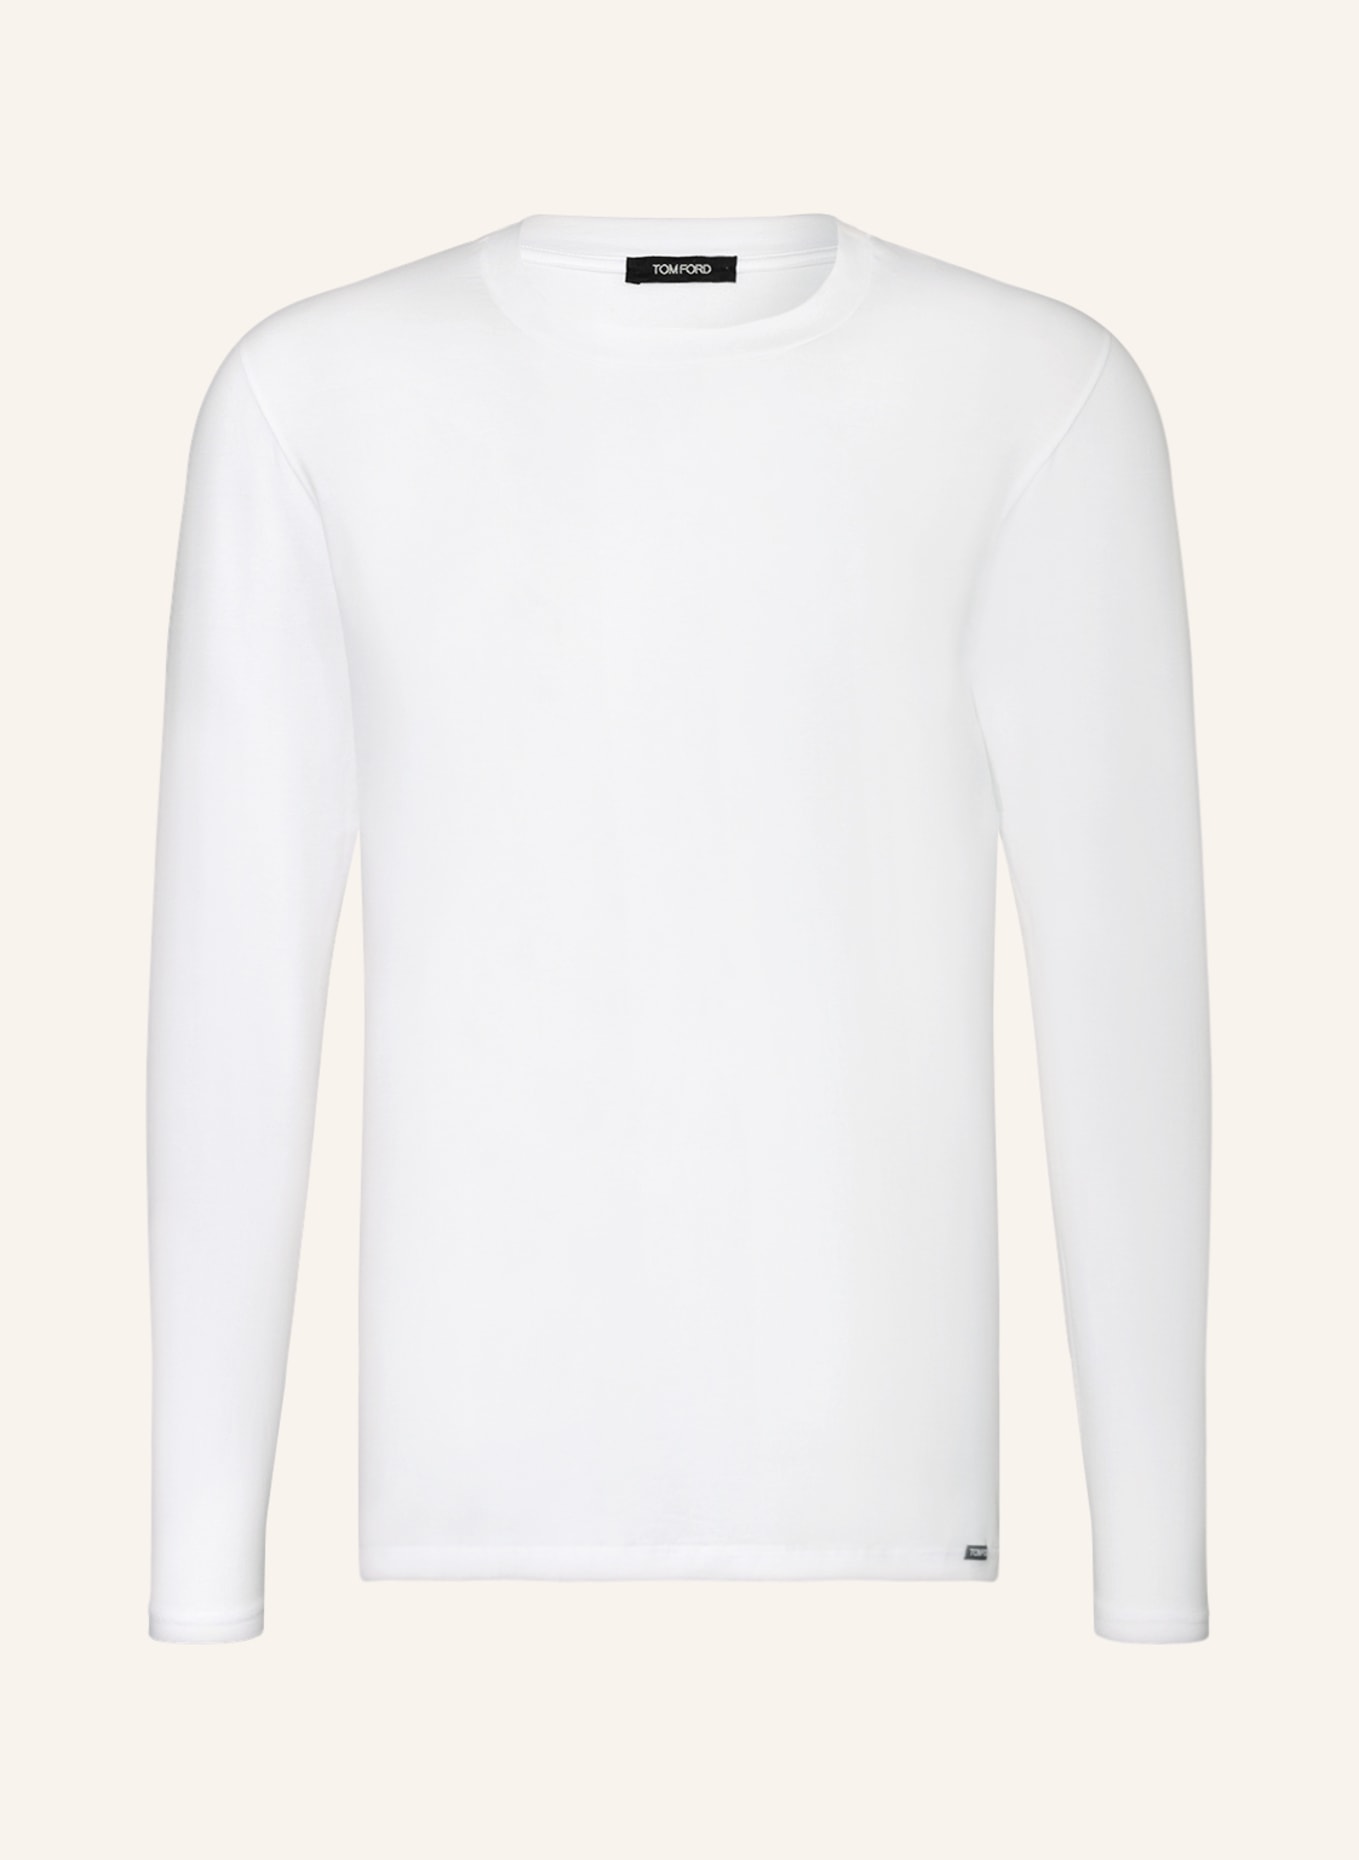 TOM FORD Long sleeve shirt, Color: WHITE (Image 1)